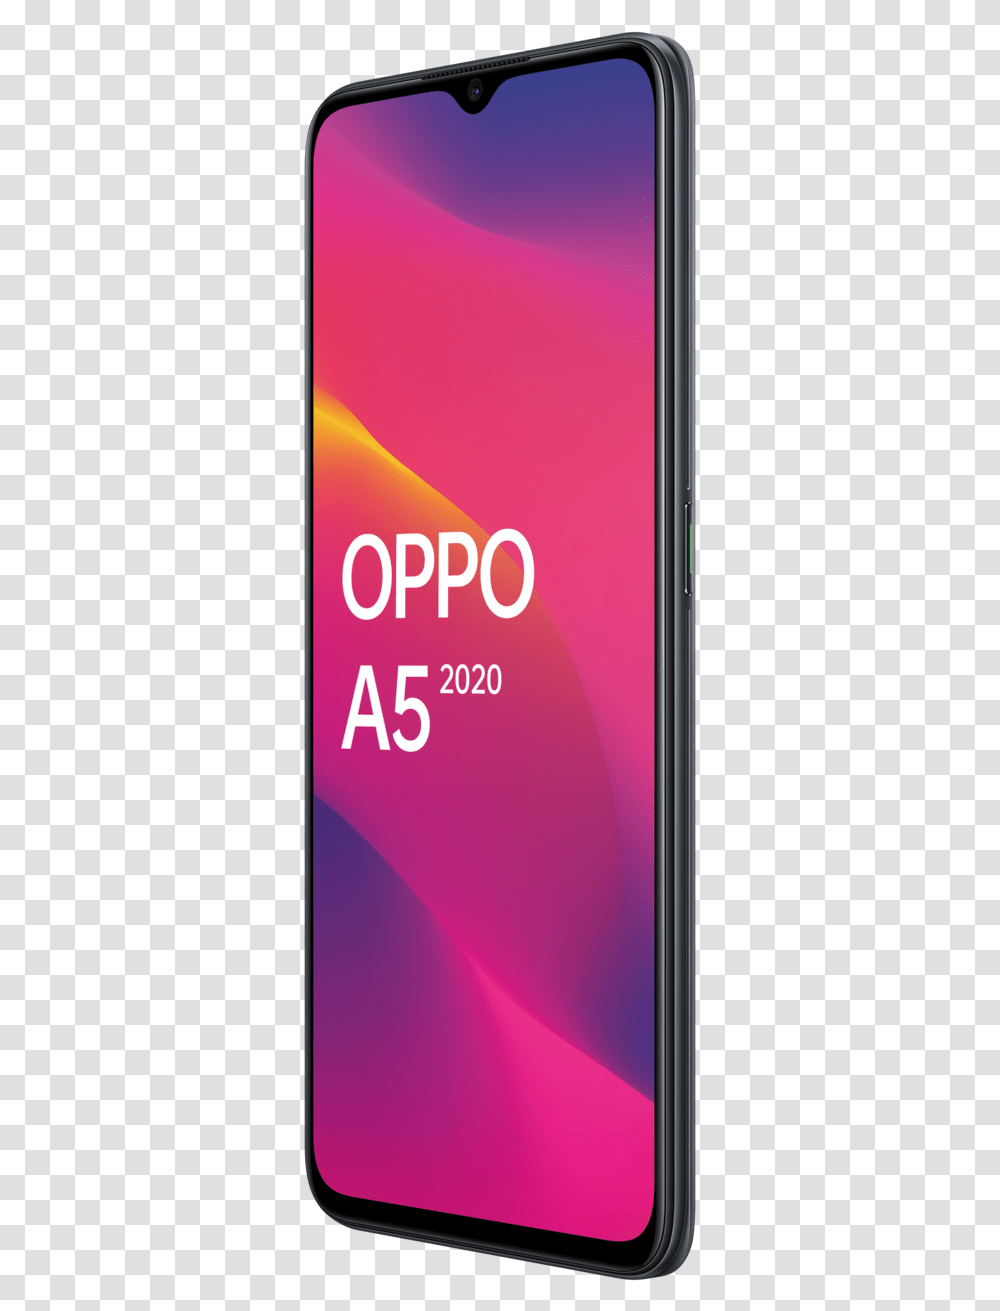 Oppo A5 2020 Smartphone Smartphone, Mobile Phone, Electronics, Cell Phone, Iphone Transparent Png